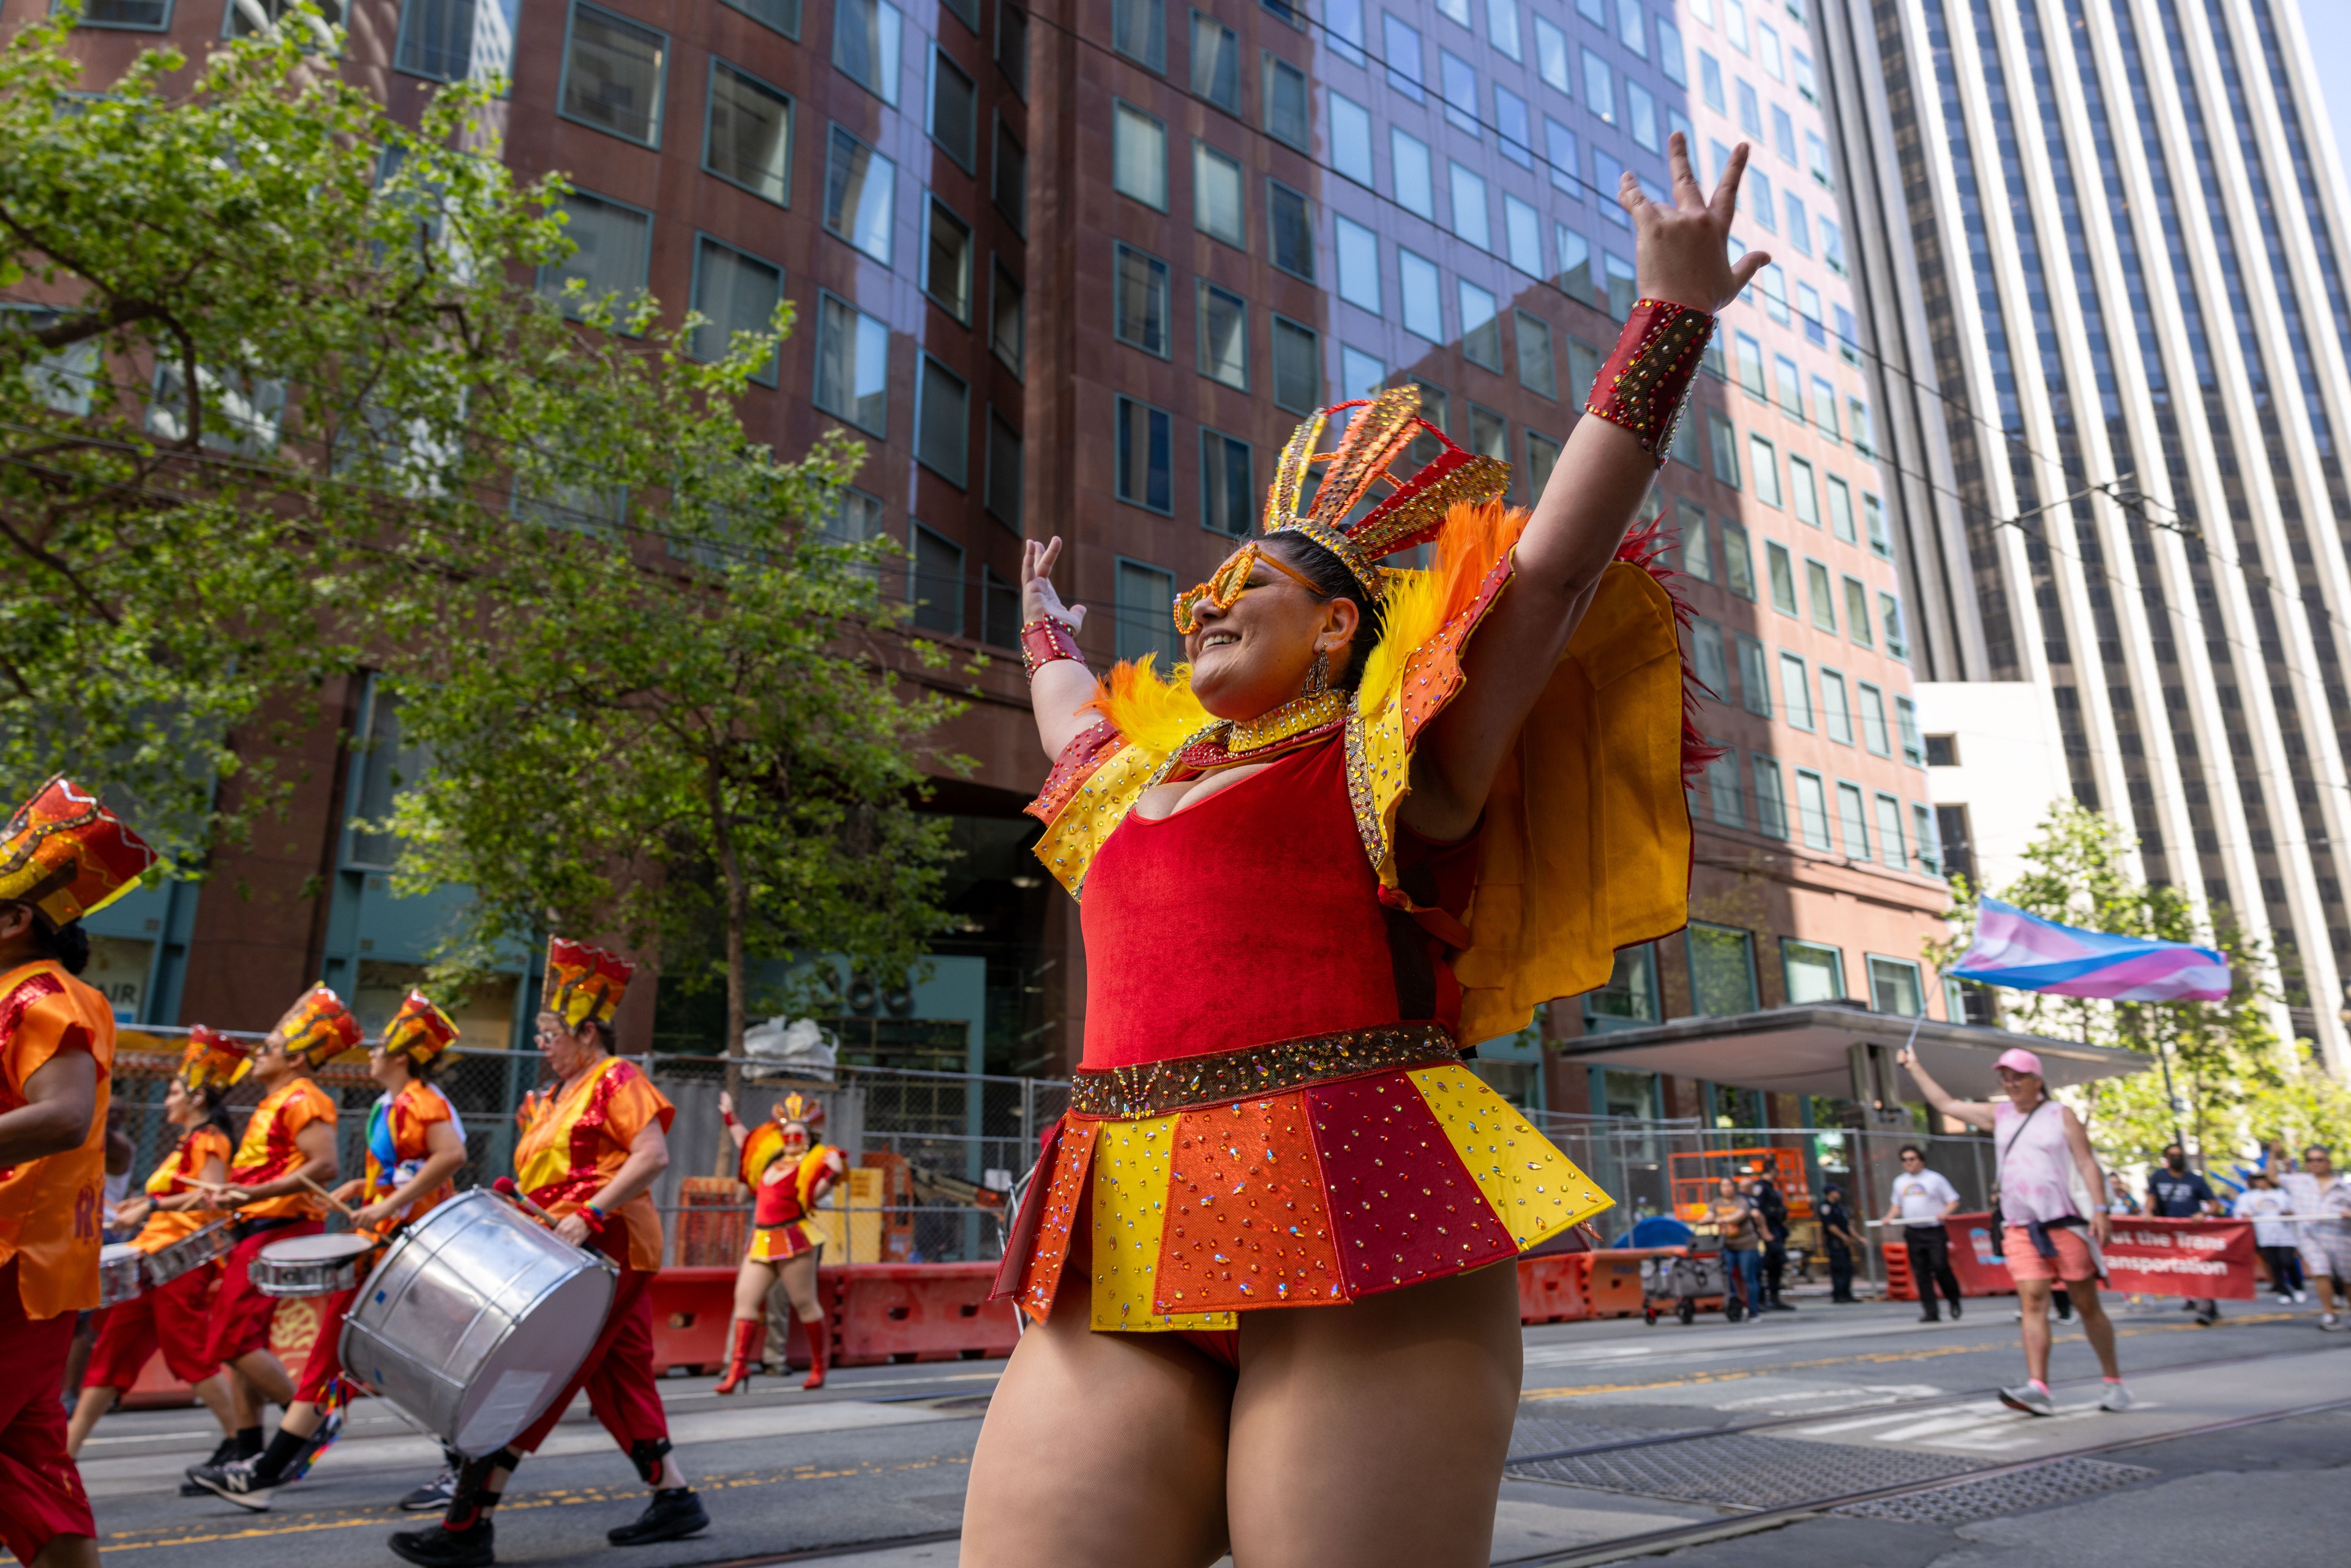 A person in a vivid red and yellow costume with arms raised is leading a parade. Drum players march behind, and tall city buildings and trees form the background.